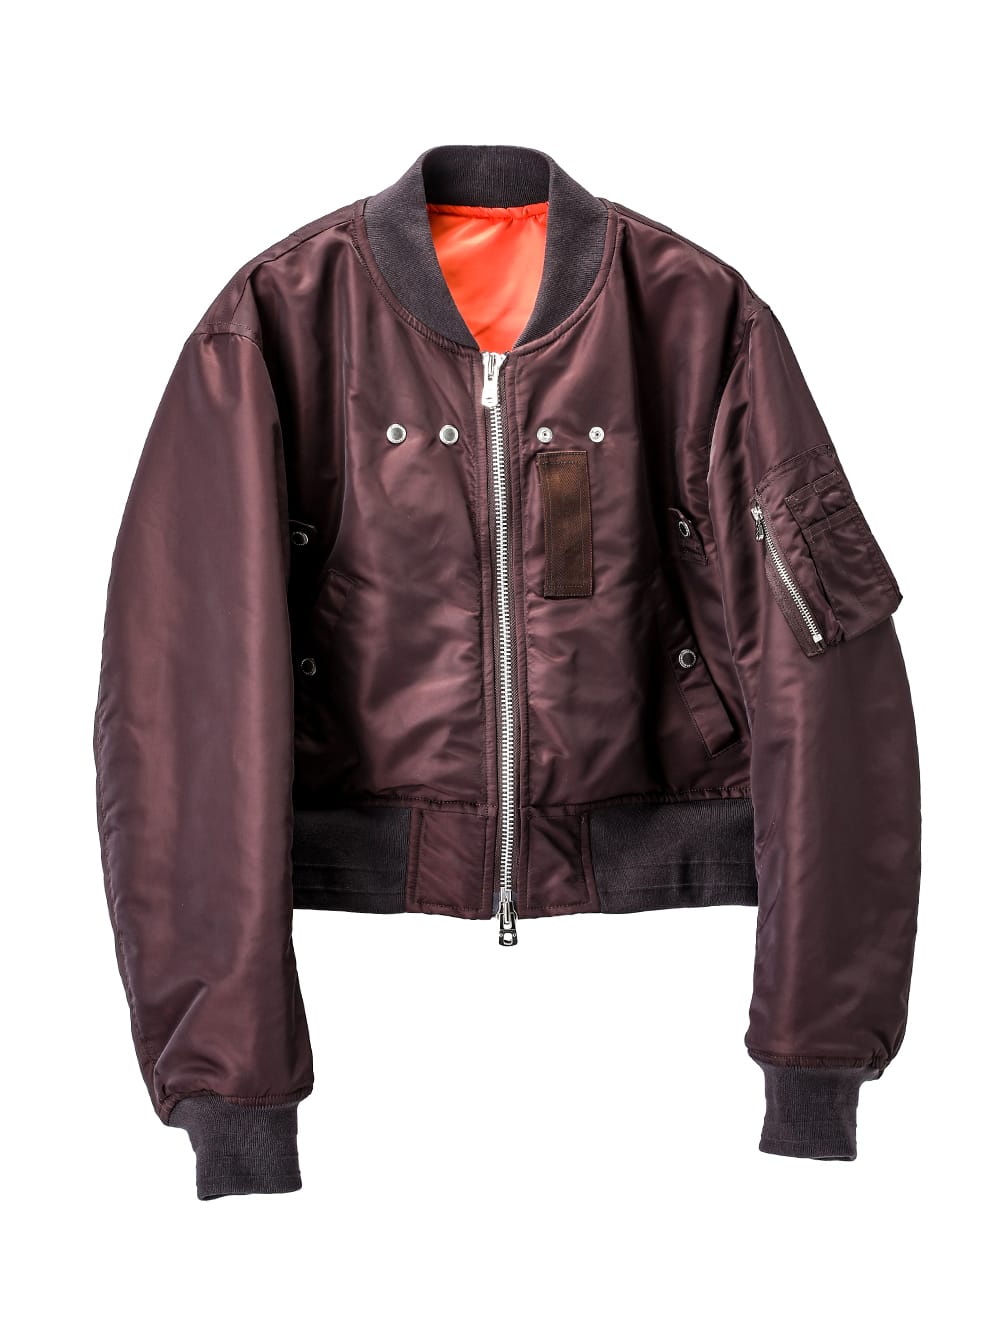 sj.0018bAW23-maroon two-way cropped bomber jacket. THE TWO OF US 